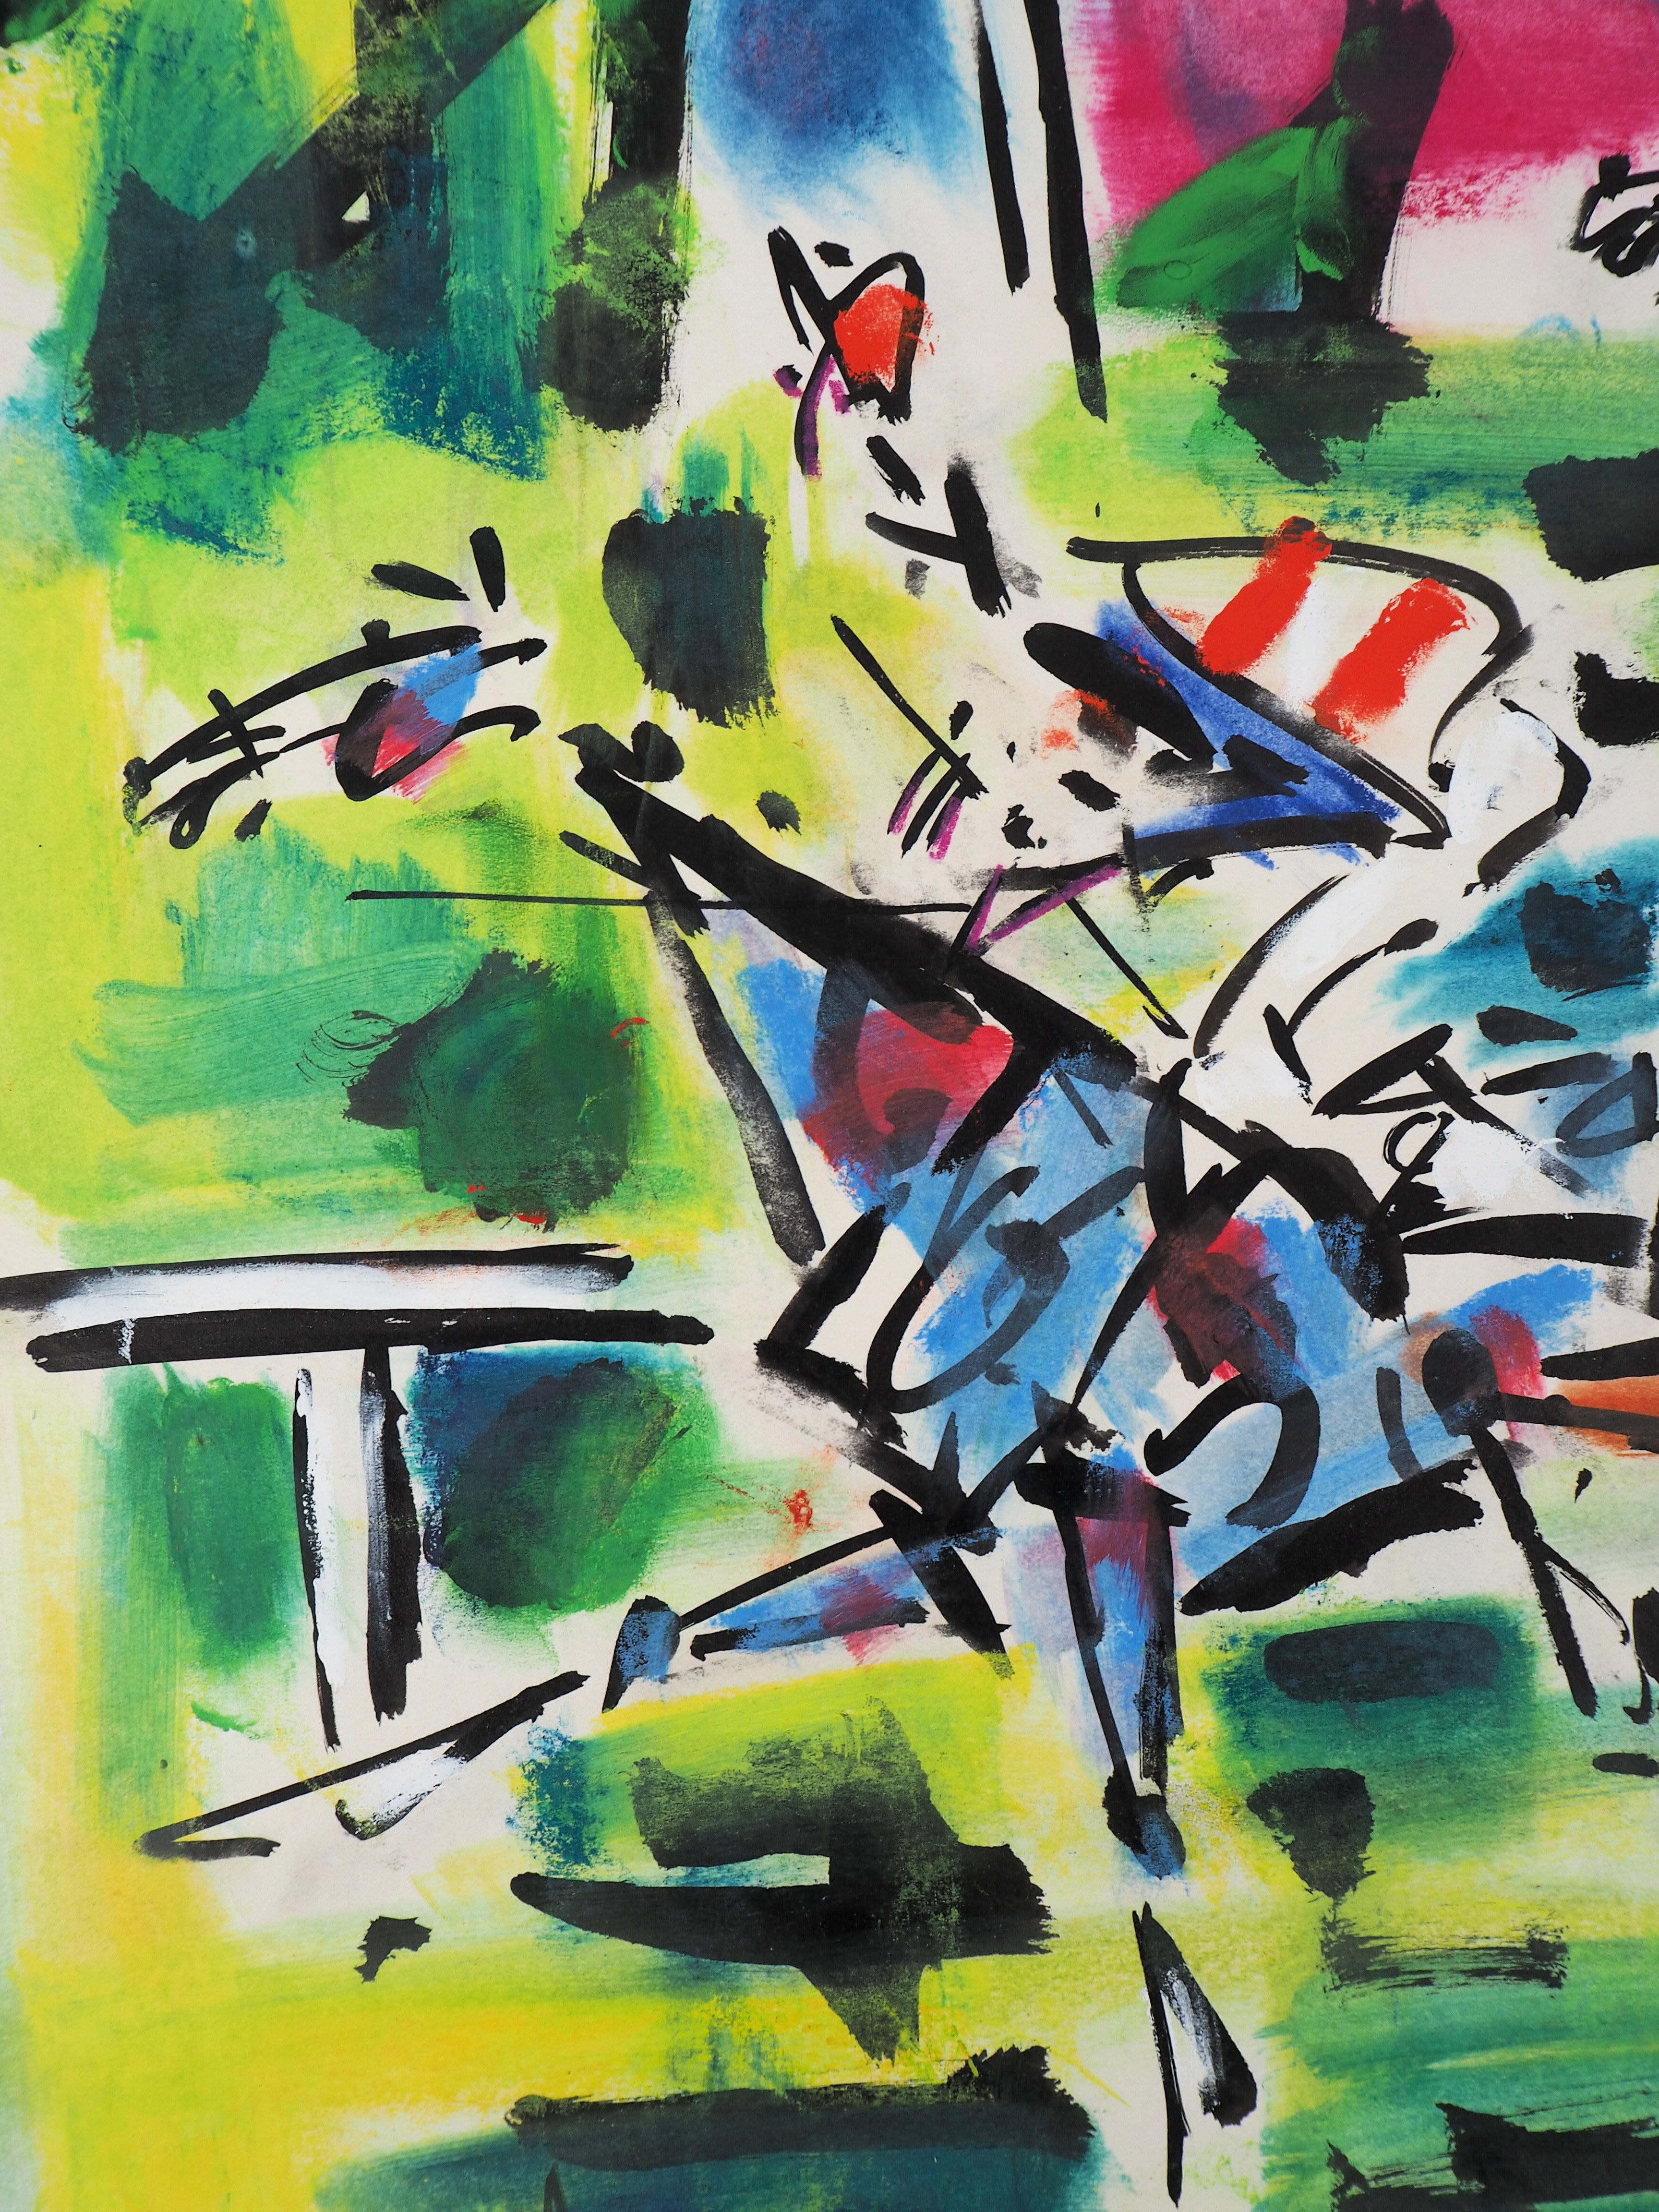 The Horse Race - Original handsigned gouache and watercolor 2